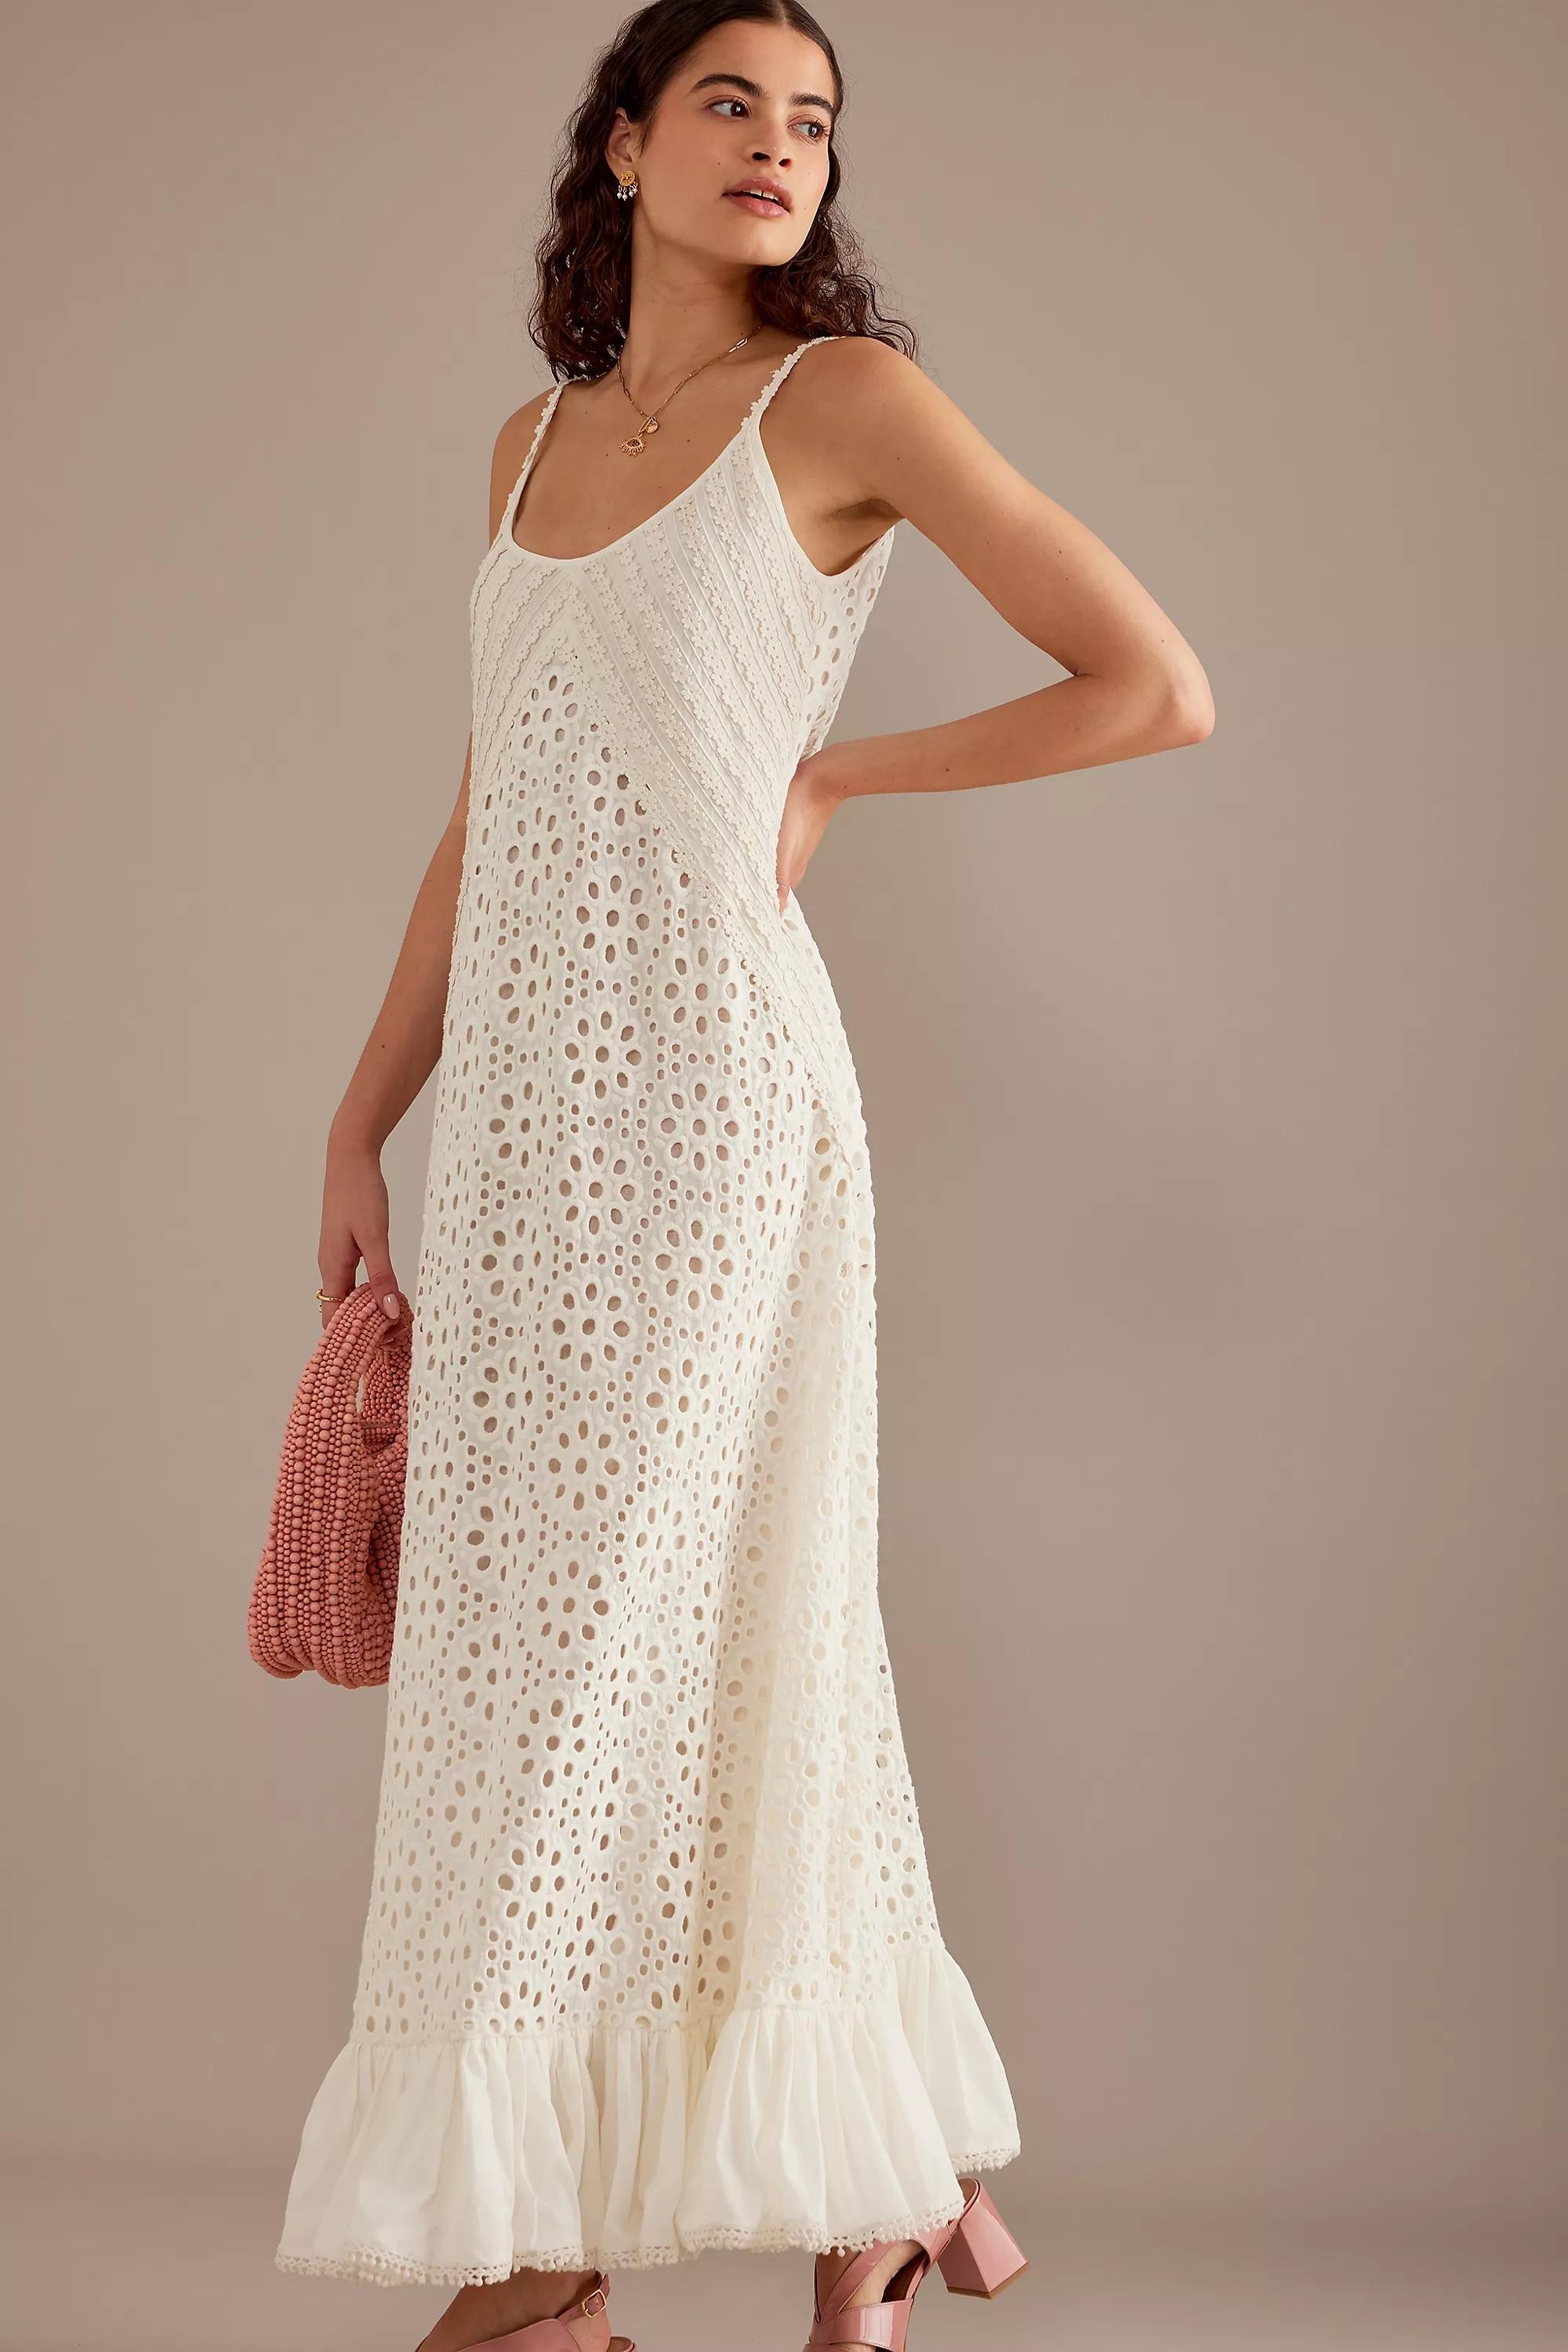 Anthropologie - Fe Payal Broderie Maxi Dress, White